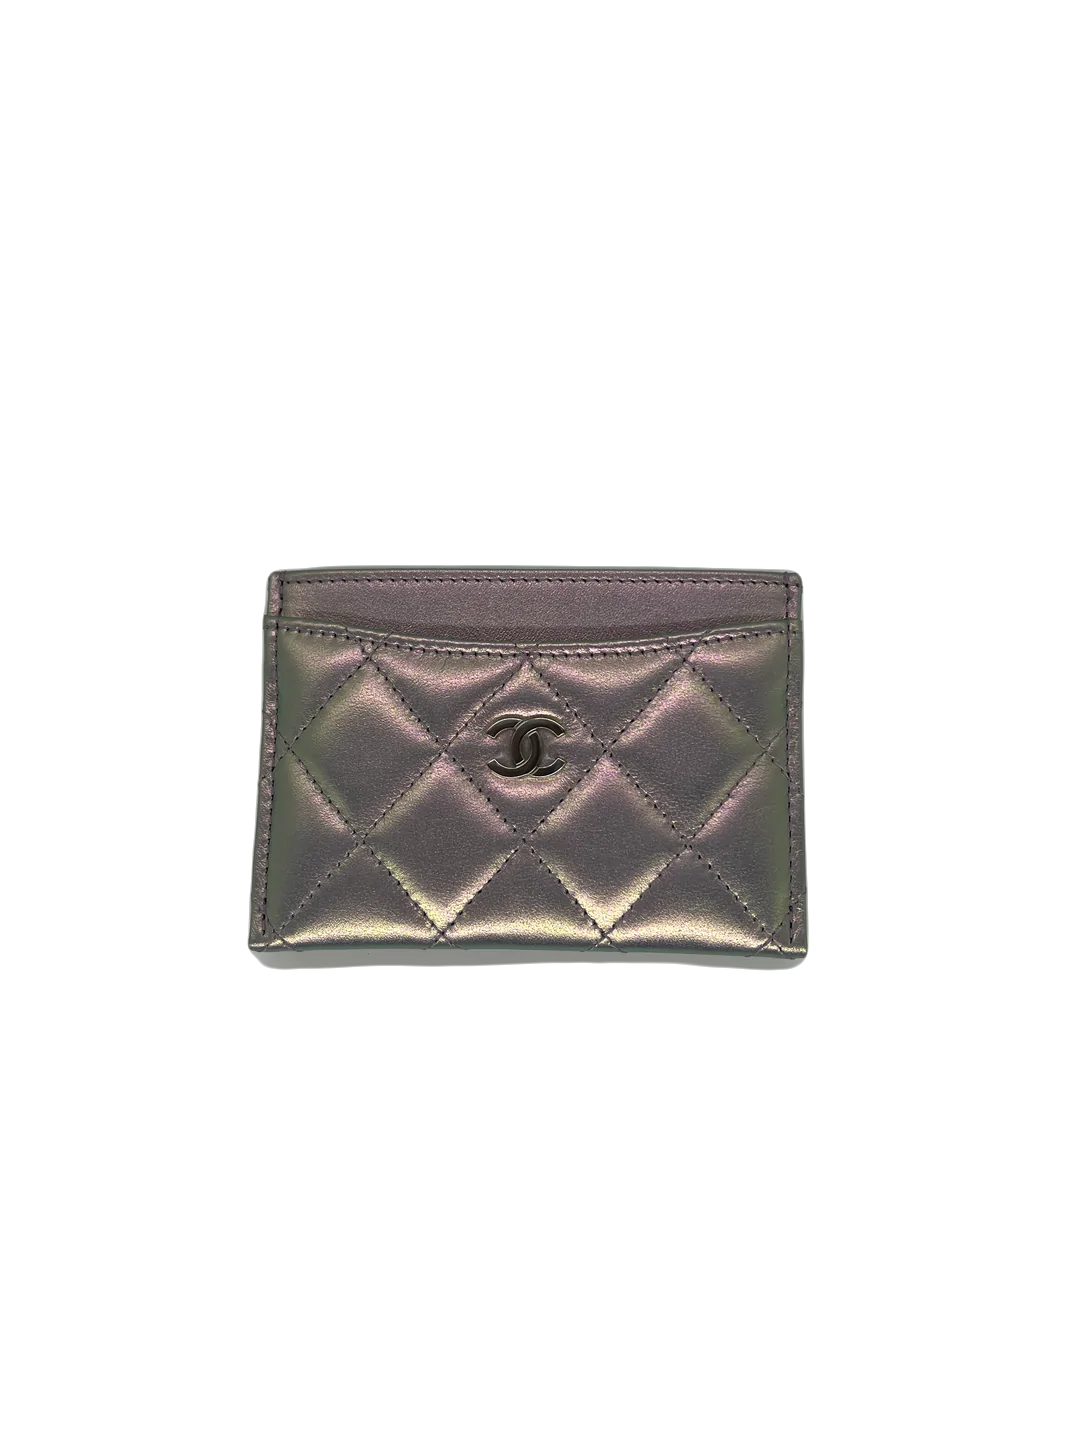 Chanel Card Holder - Iridescent - SOLD